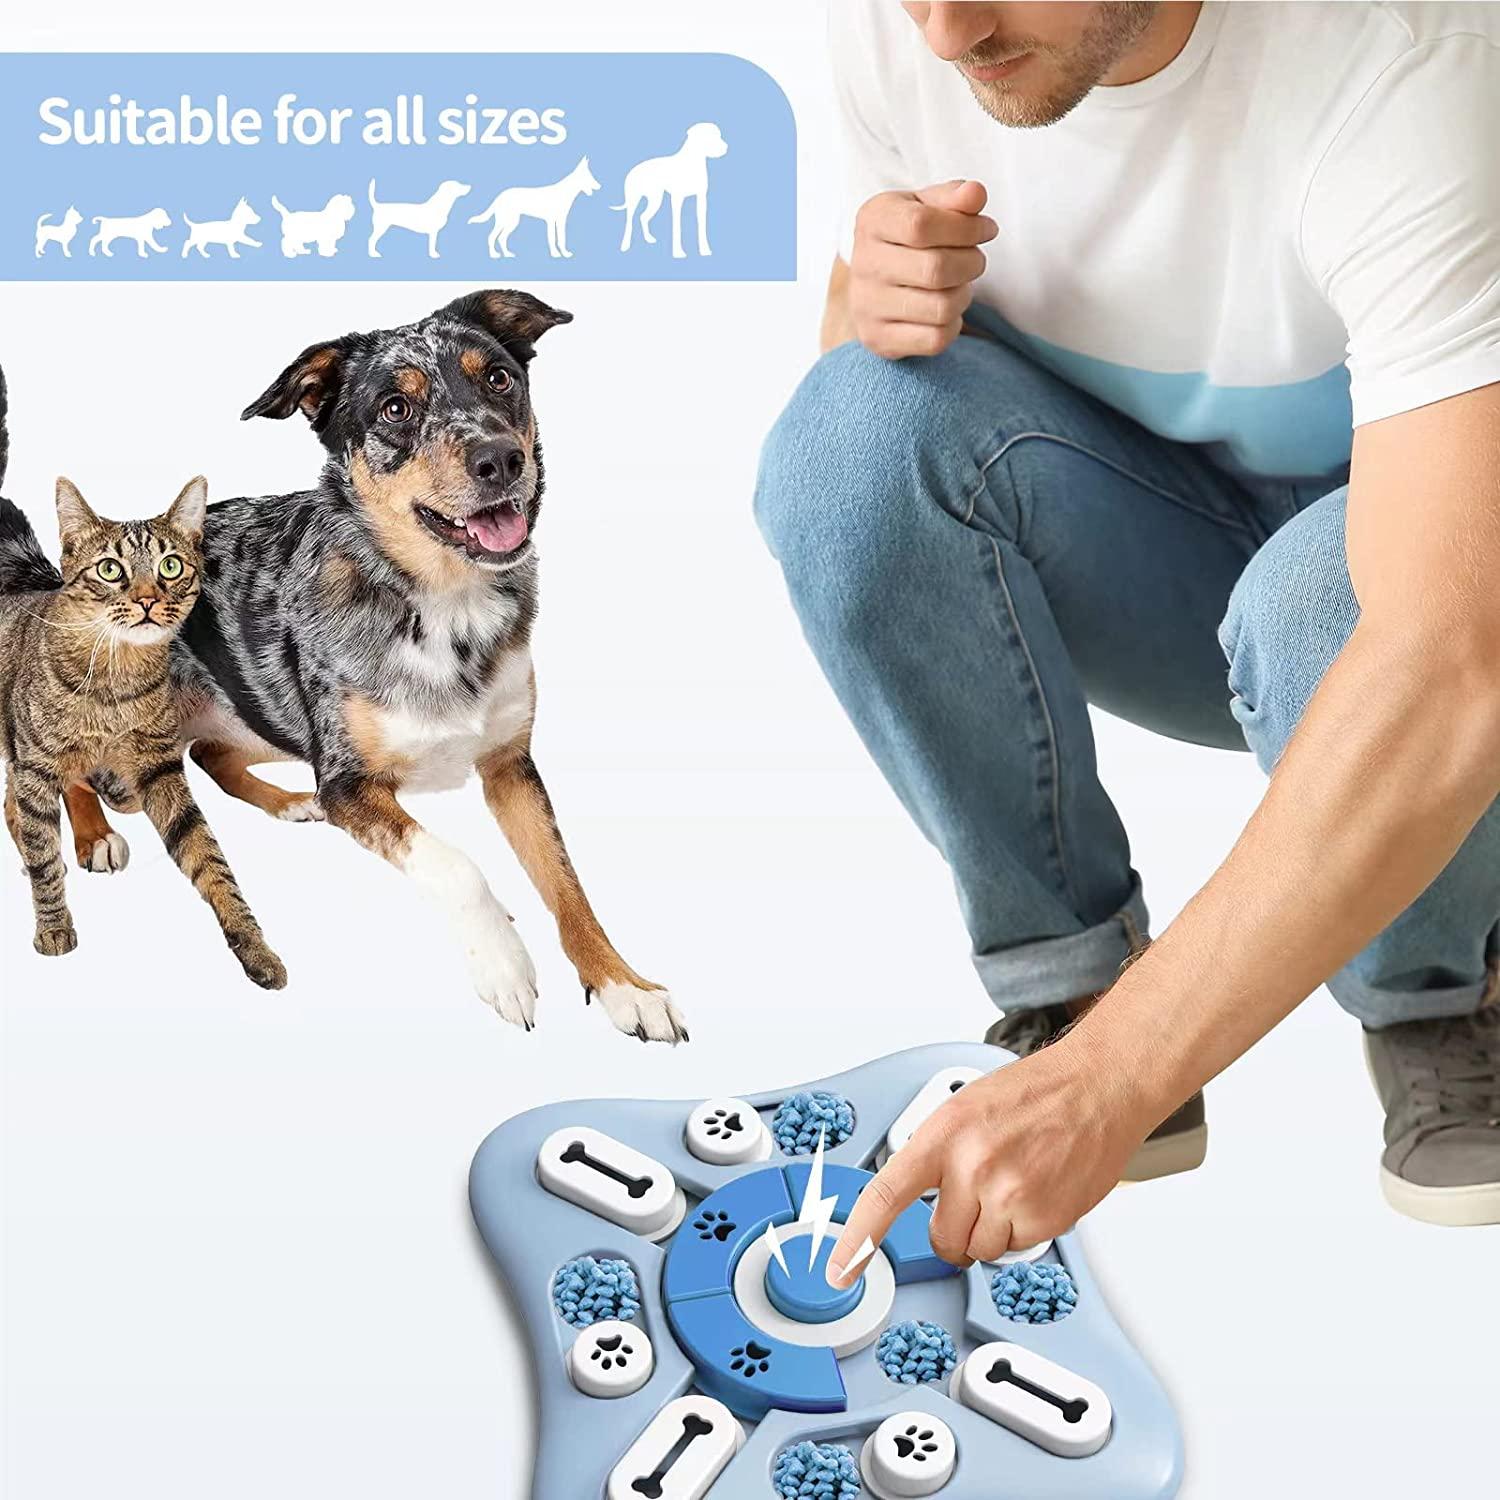 Pet IQ Intelligent Toy Smart Dog Puzzle Toys for Beginner, Puppy Treat  Dispenser Interactive Dog Toys - Improve Your Dog's IQ, Specially Designed  for Training Treats 